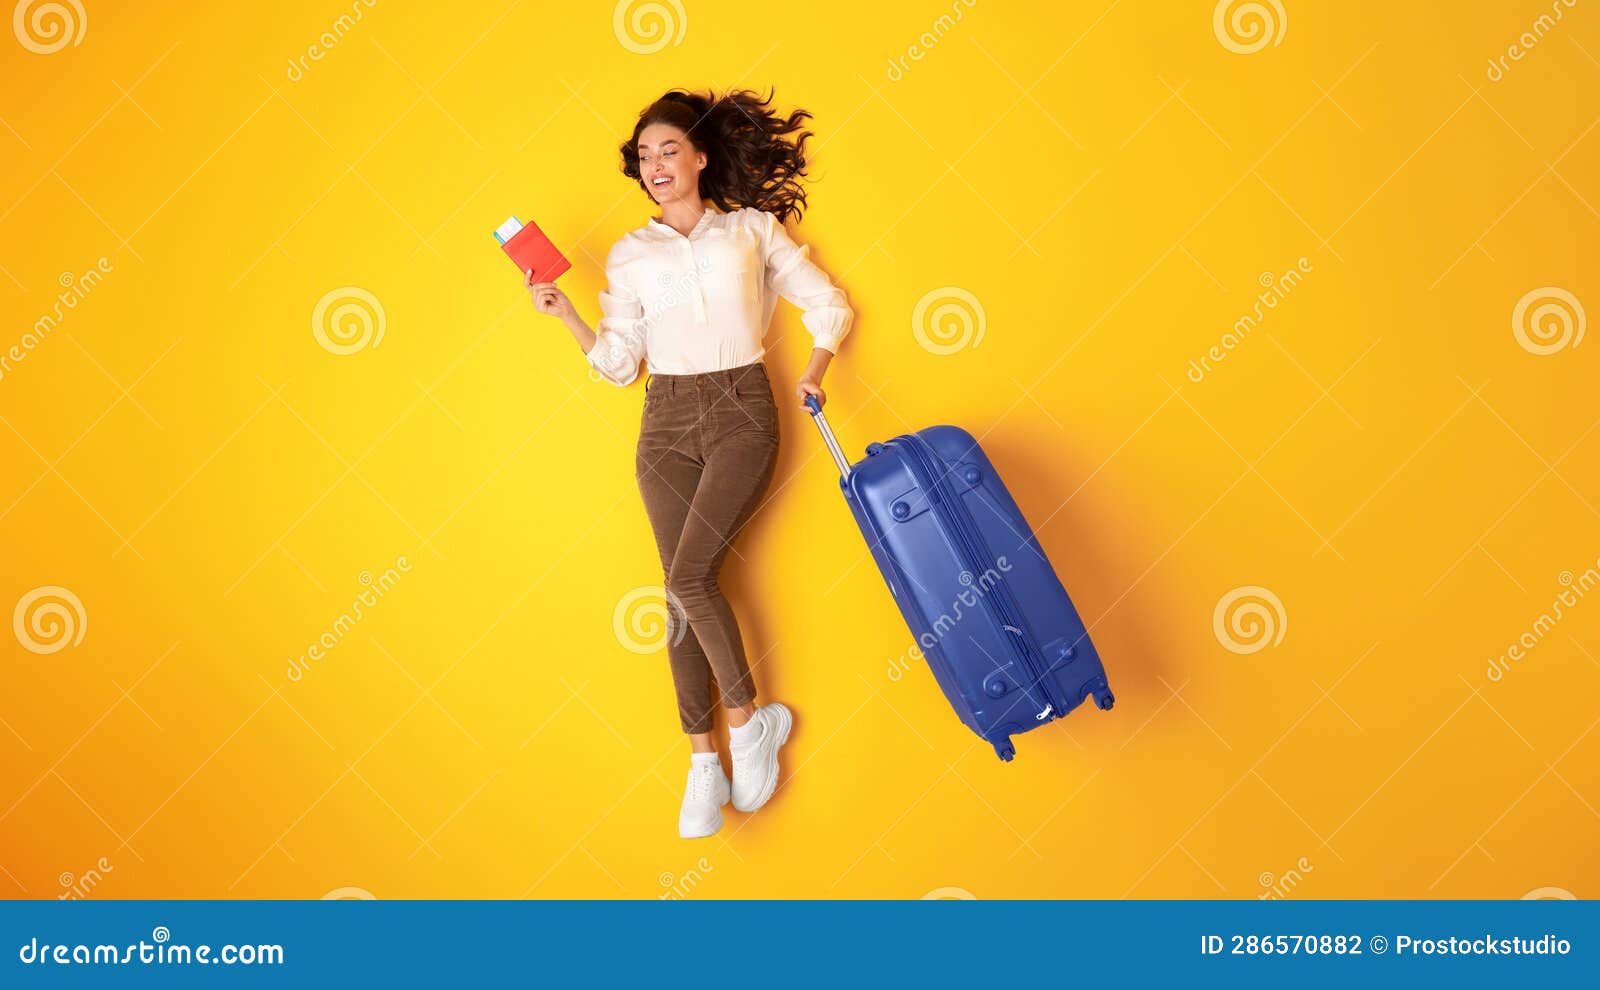 joyful young globetrotter lady with suitcase and tickets in studio